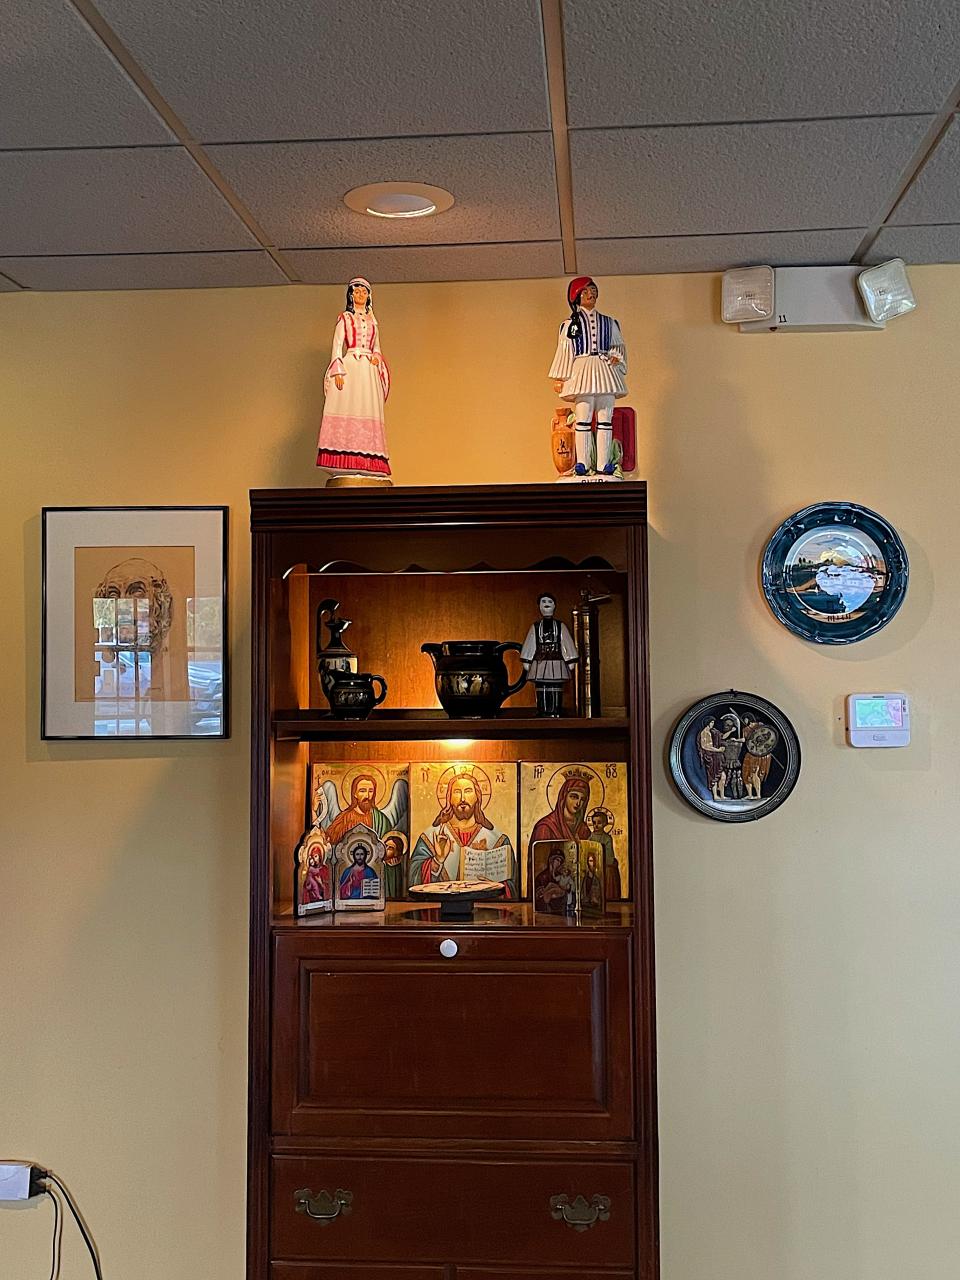 The decor at Symeon's Greek Restaurant in Yorkville includes figurines made of old Greek liquor bottles and plates, paintings and drawings donated by customers.